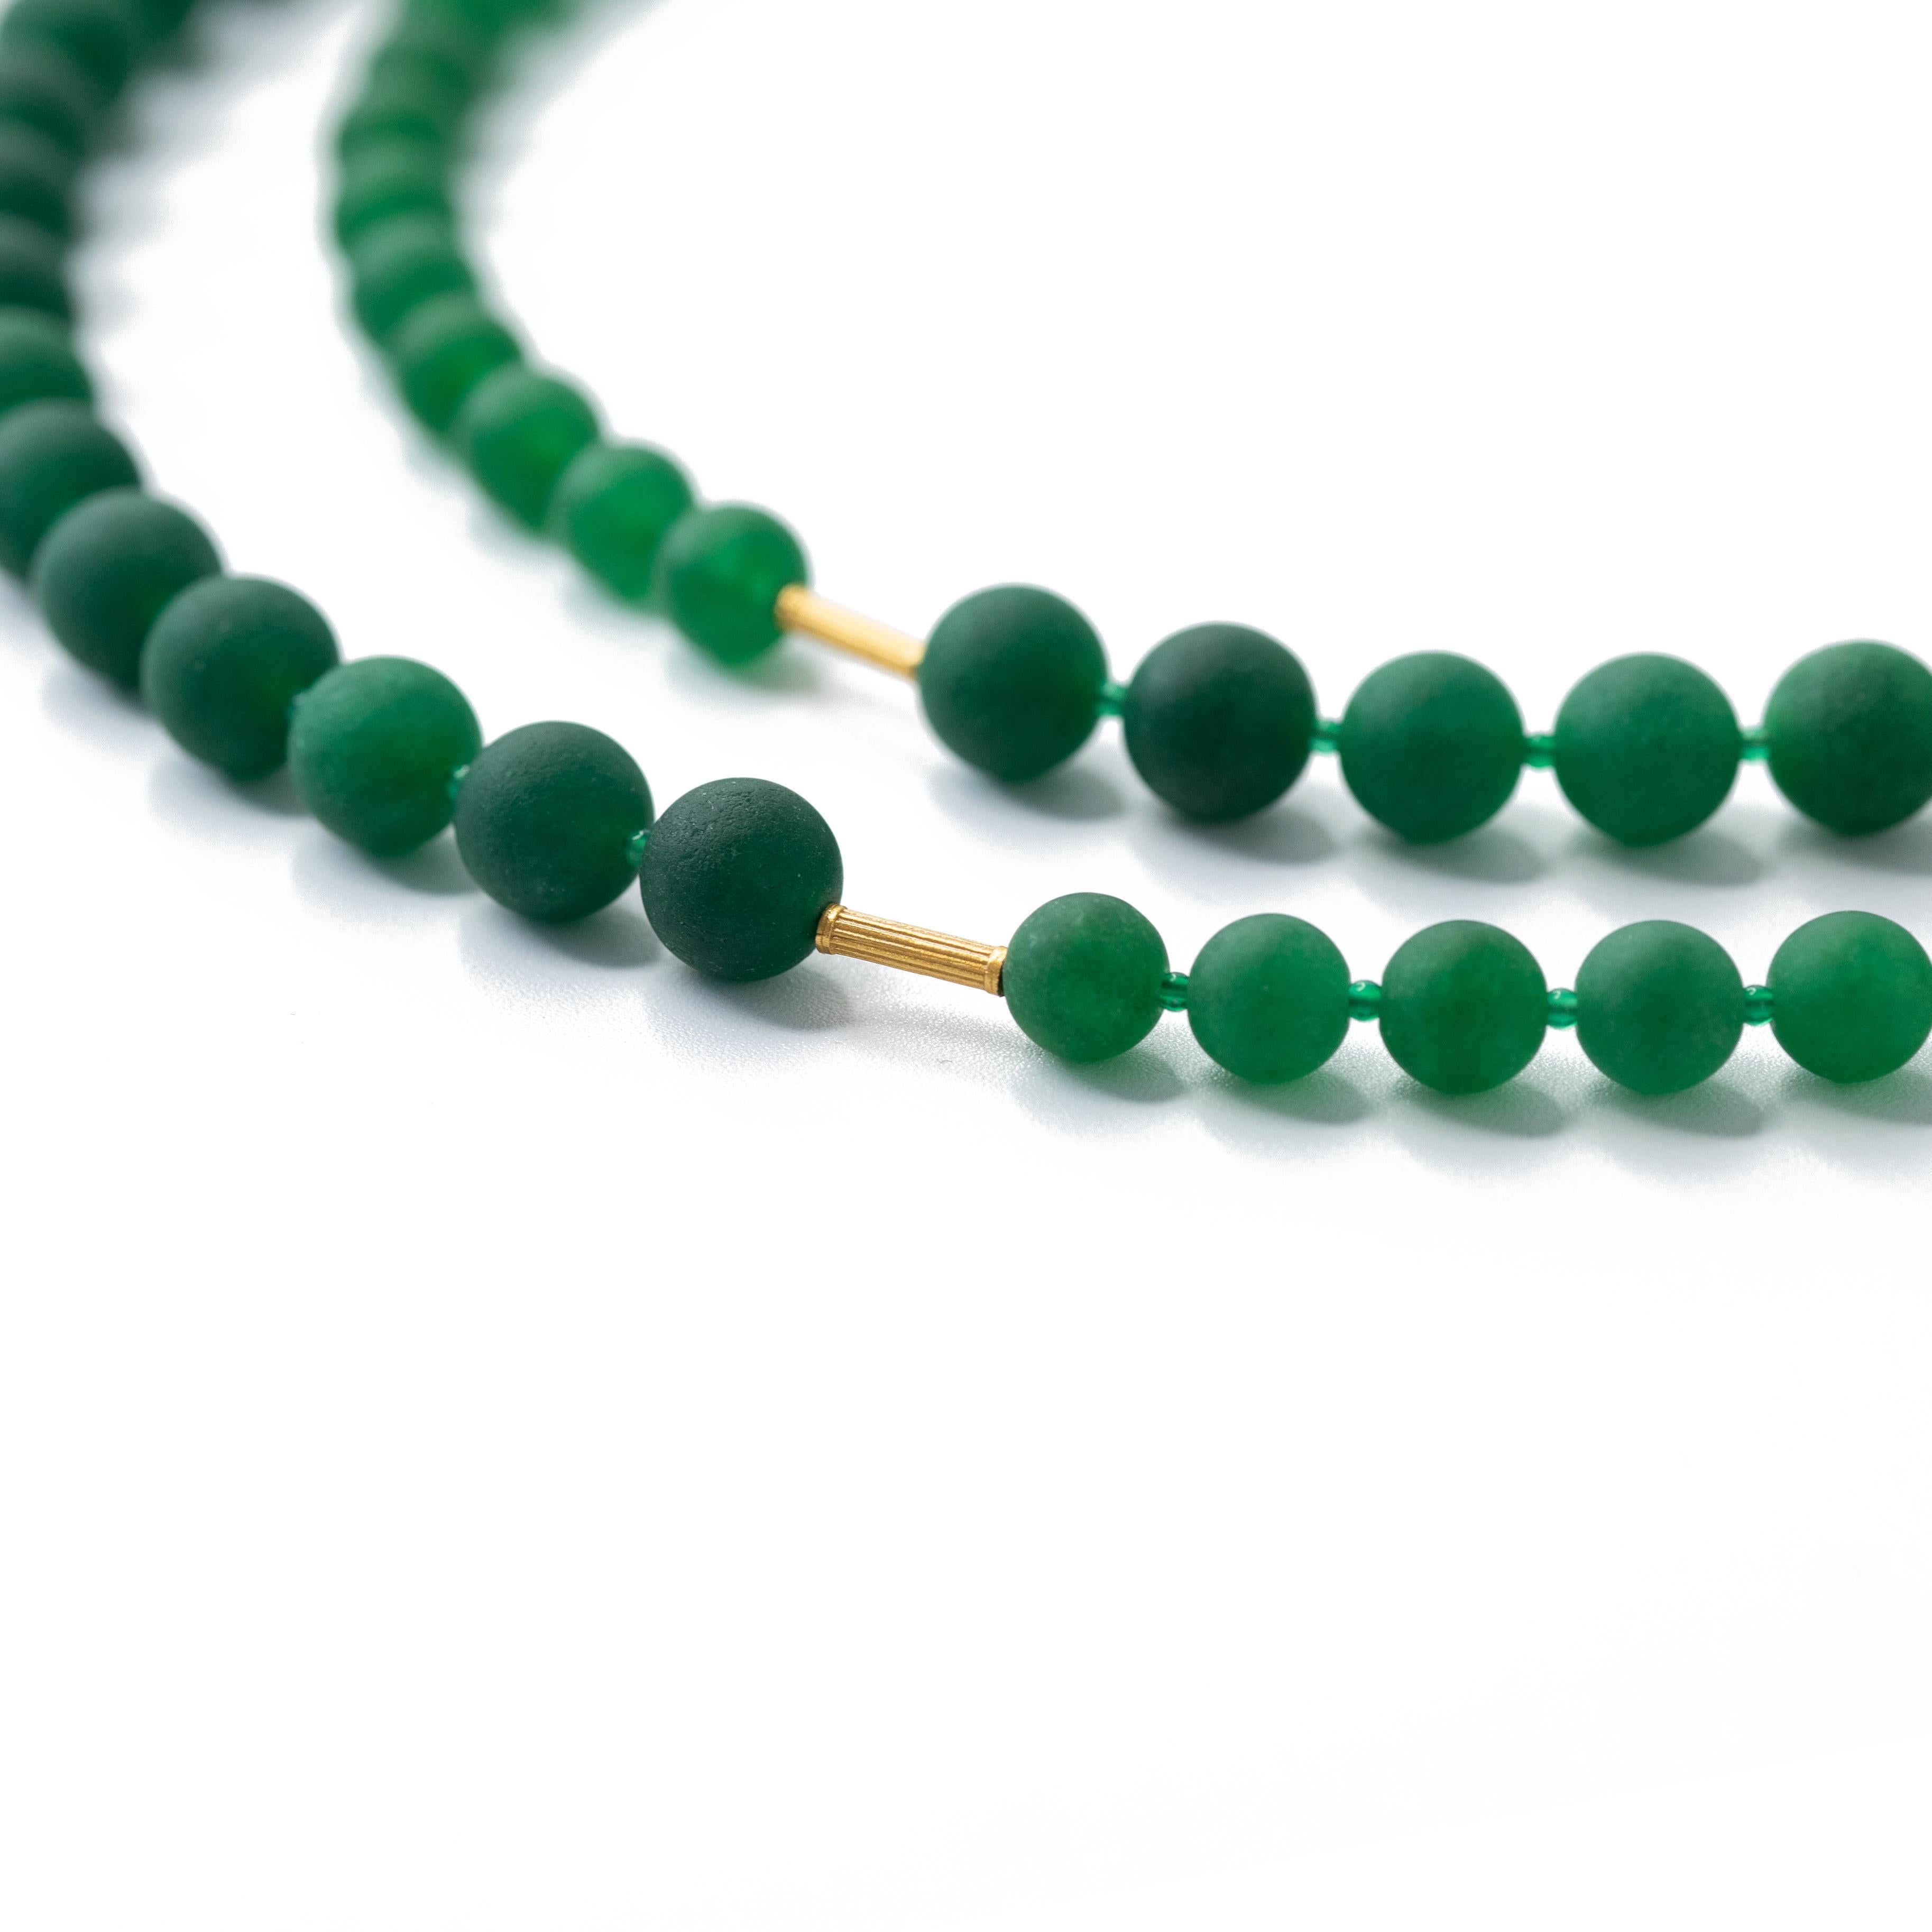 Women's Green Chalcedony Beads and Gold Necklace -The Poet's Garden by Bombyx House For Sale